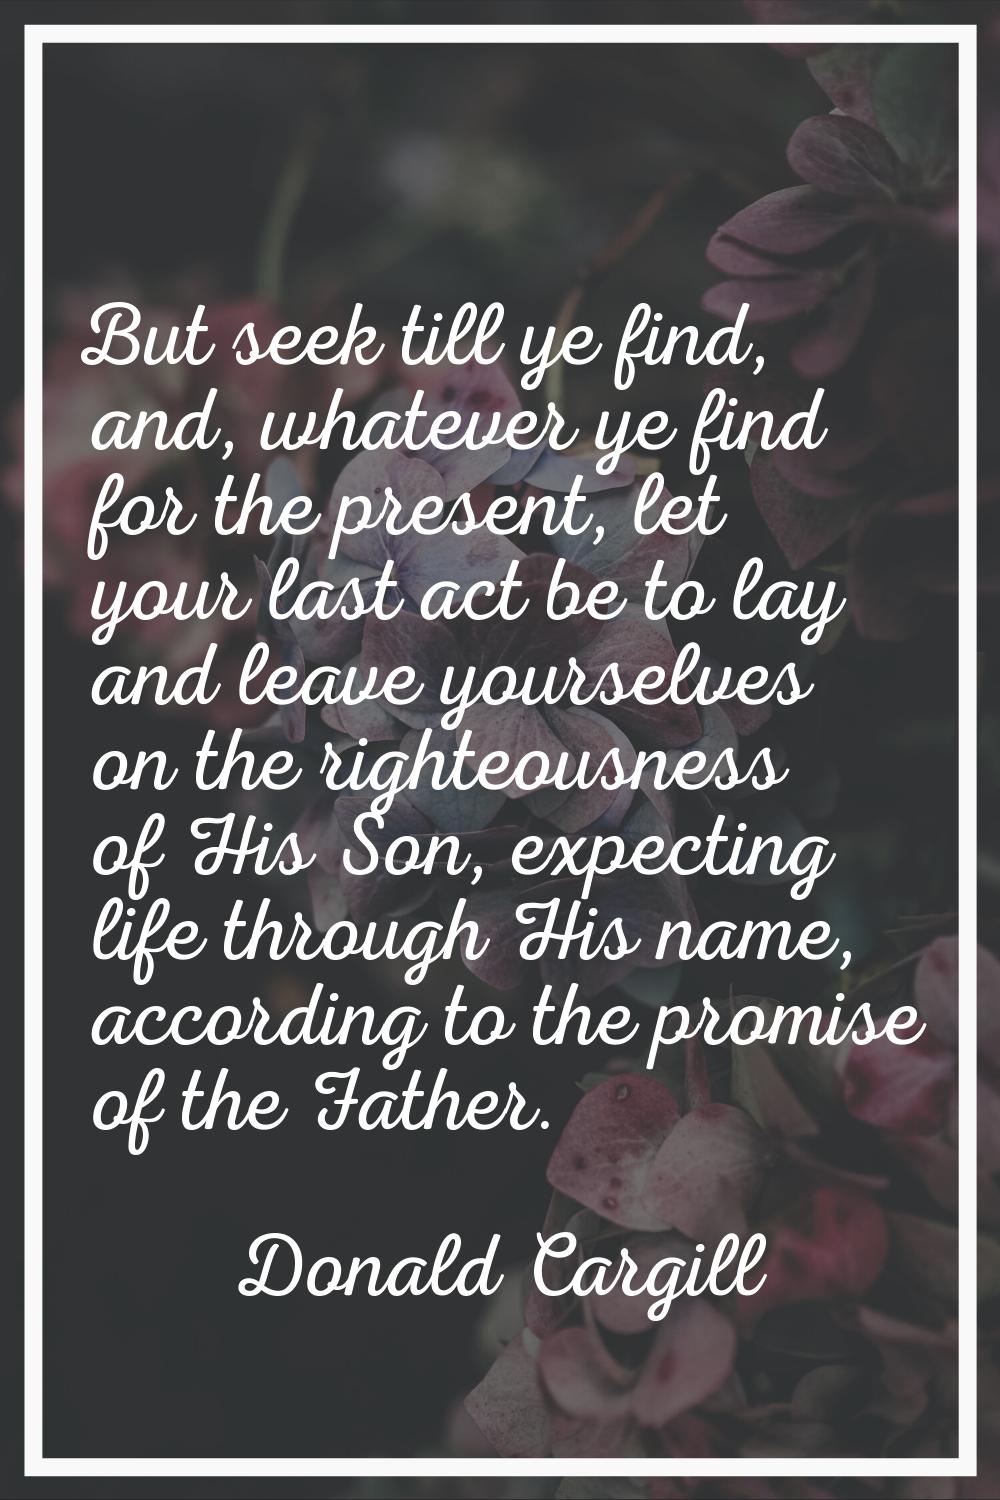 But seek till ye find, and, whatever ye find for the present, let your last act be to lay and leave